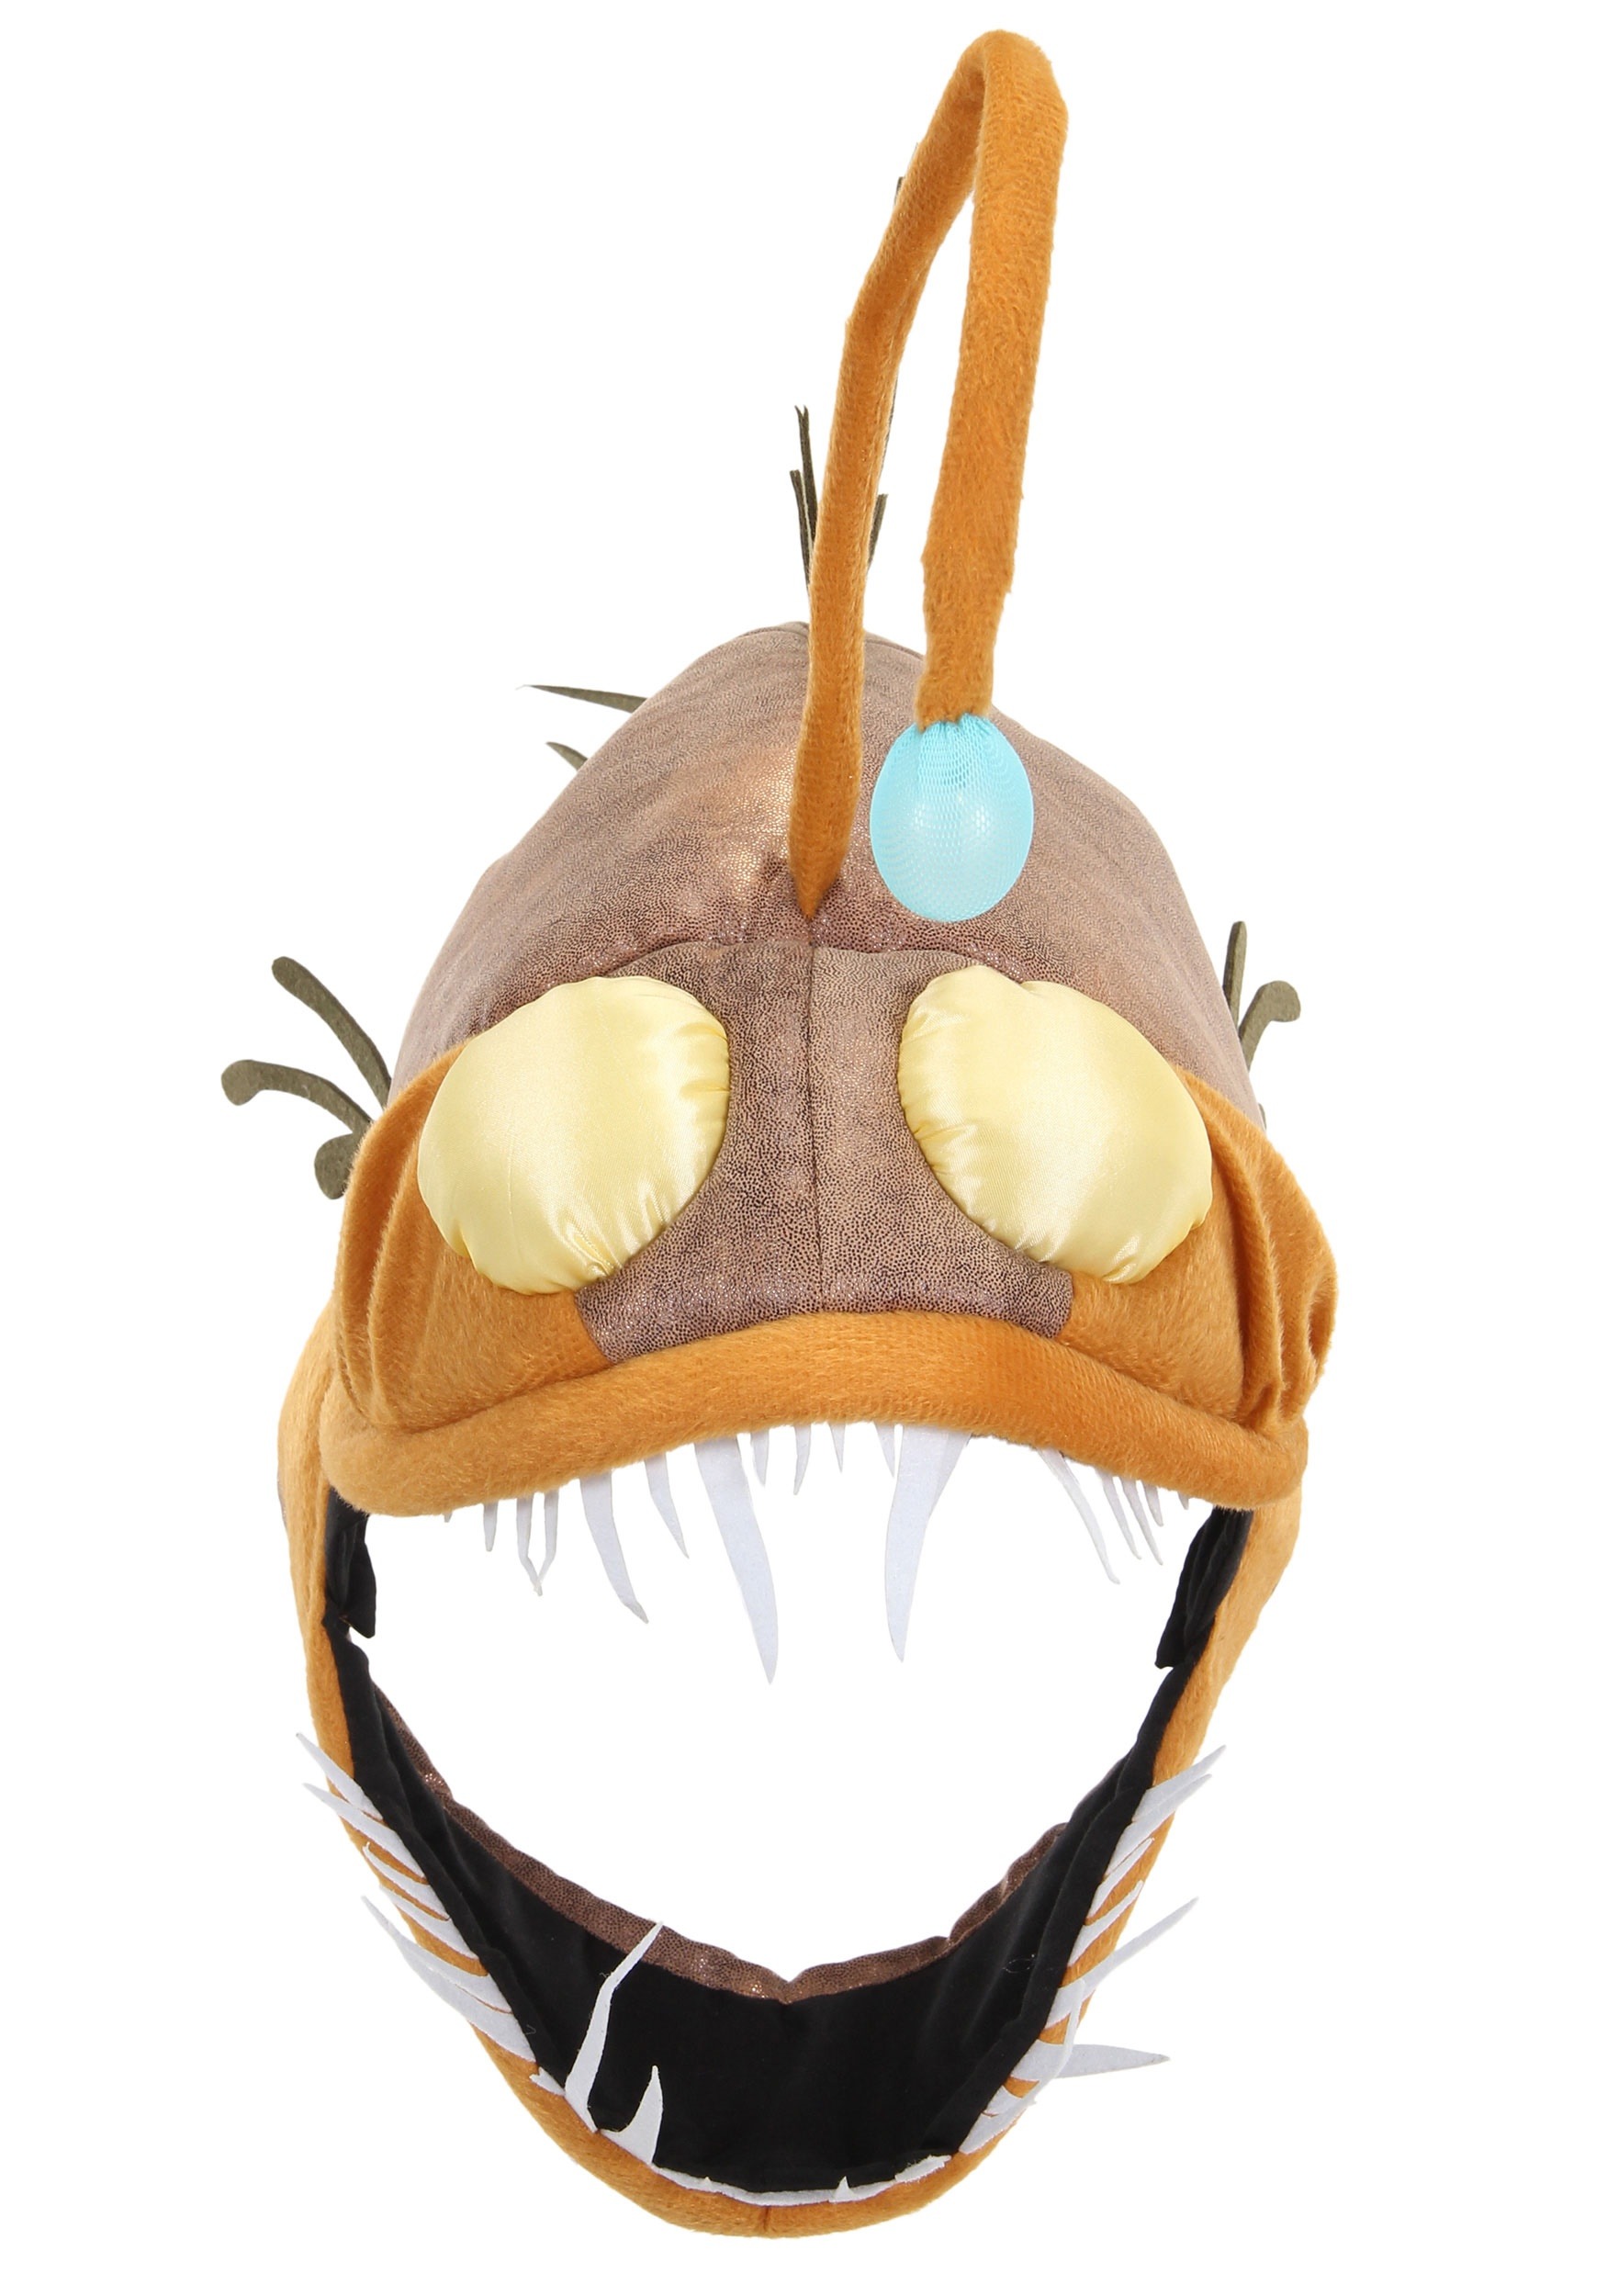 Adult's Light-Up Angler Fish Jawesome Costume Hat